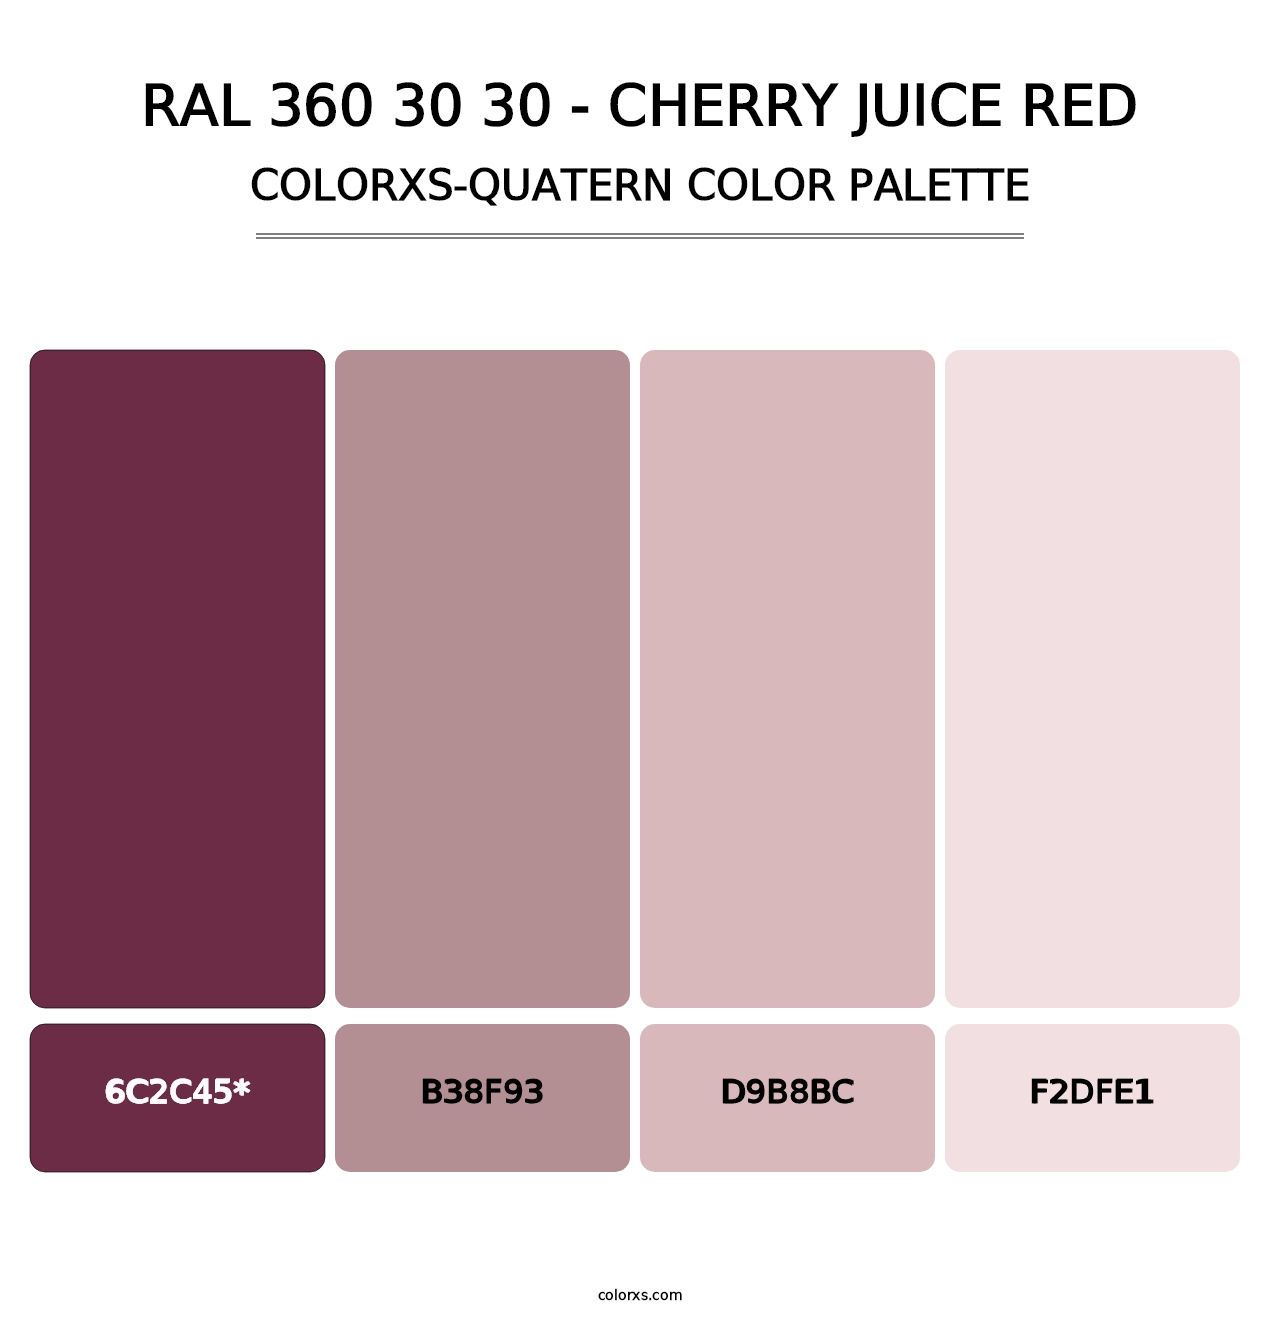 RAL 360 30 30 - Cherry Juice Red - Colorxs Quatern Palette